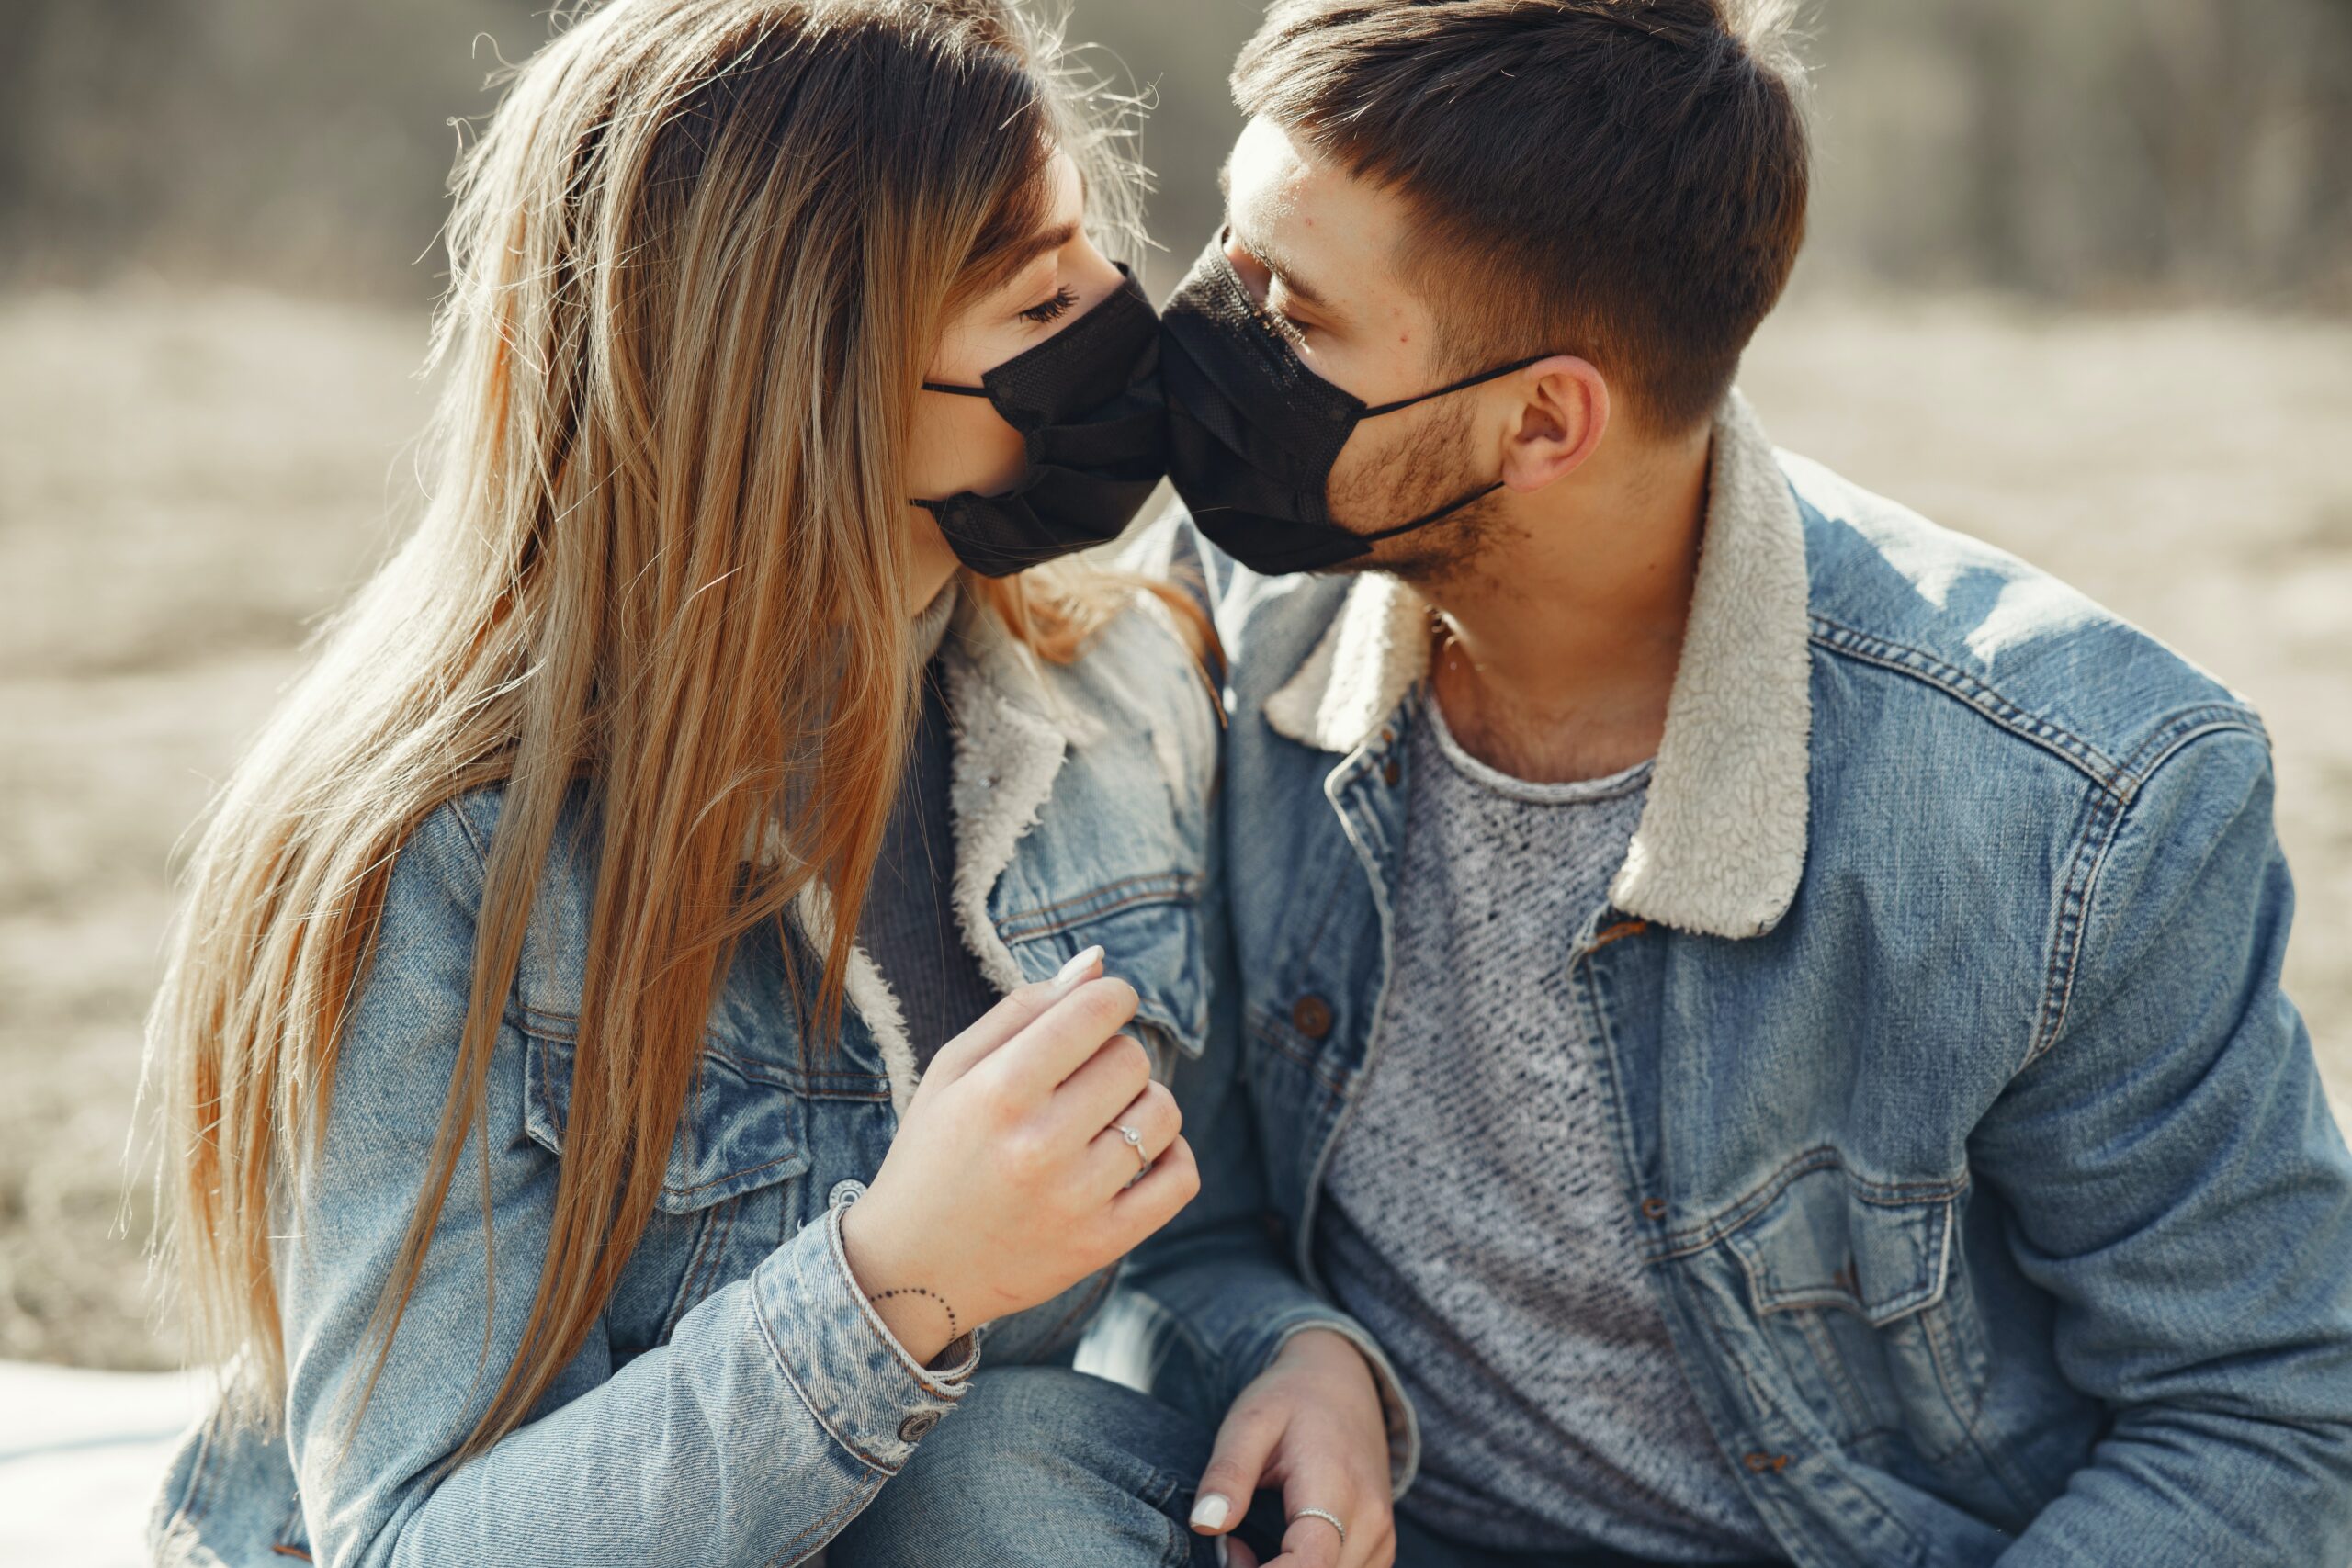 This is a photo of two people kissing each other through the face masks they are wearing.